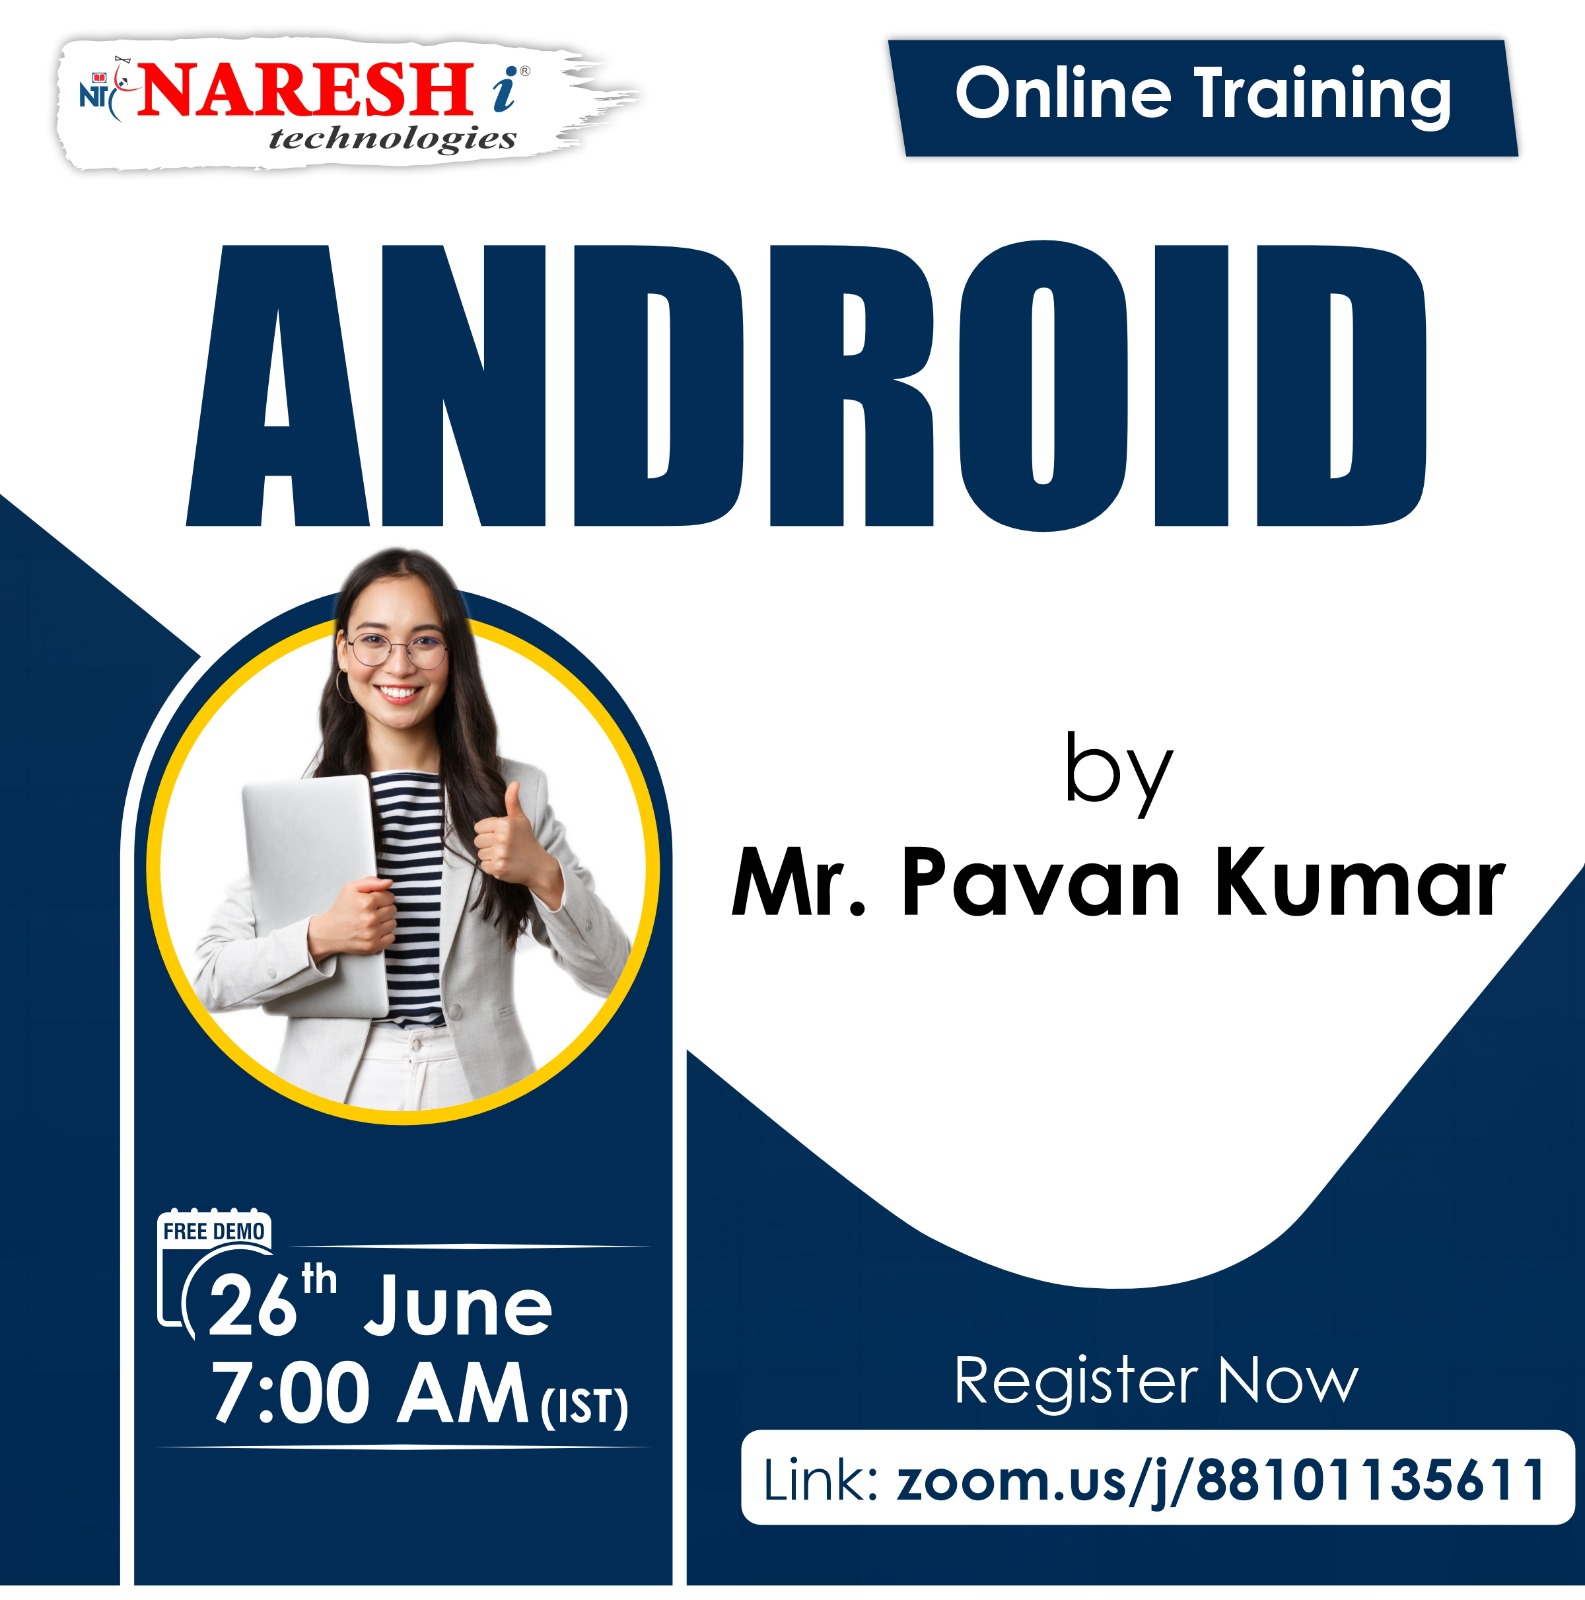 Free Demo On Android by Mr. Pavan Kumar, Online Event